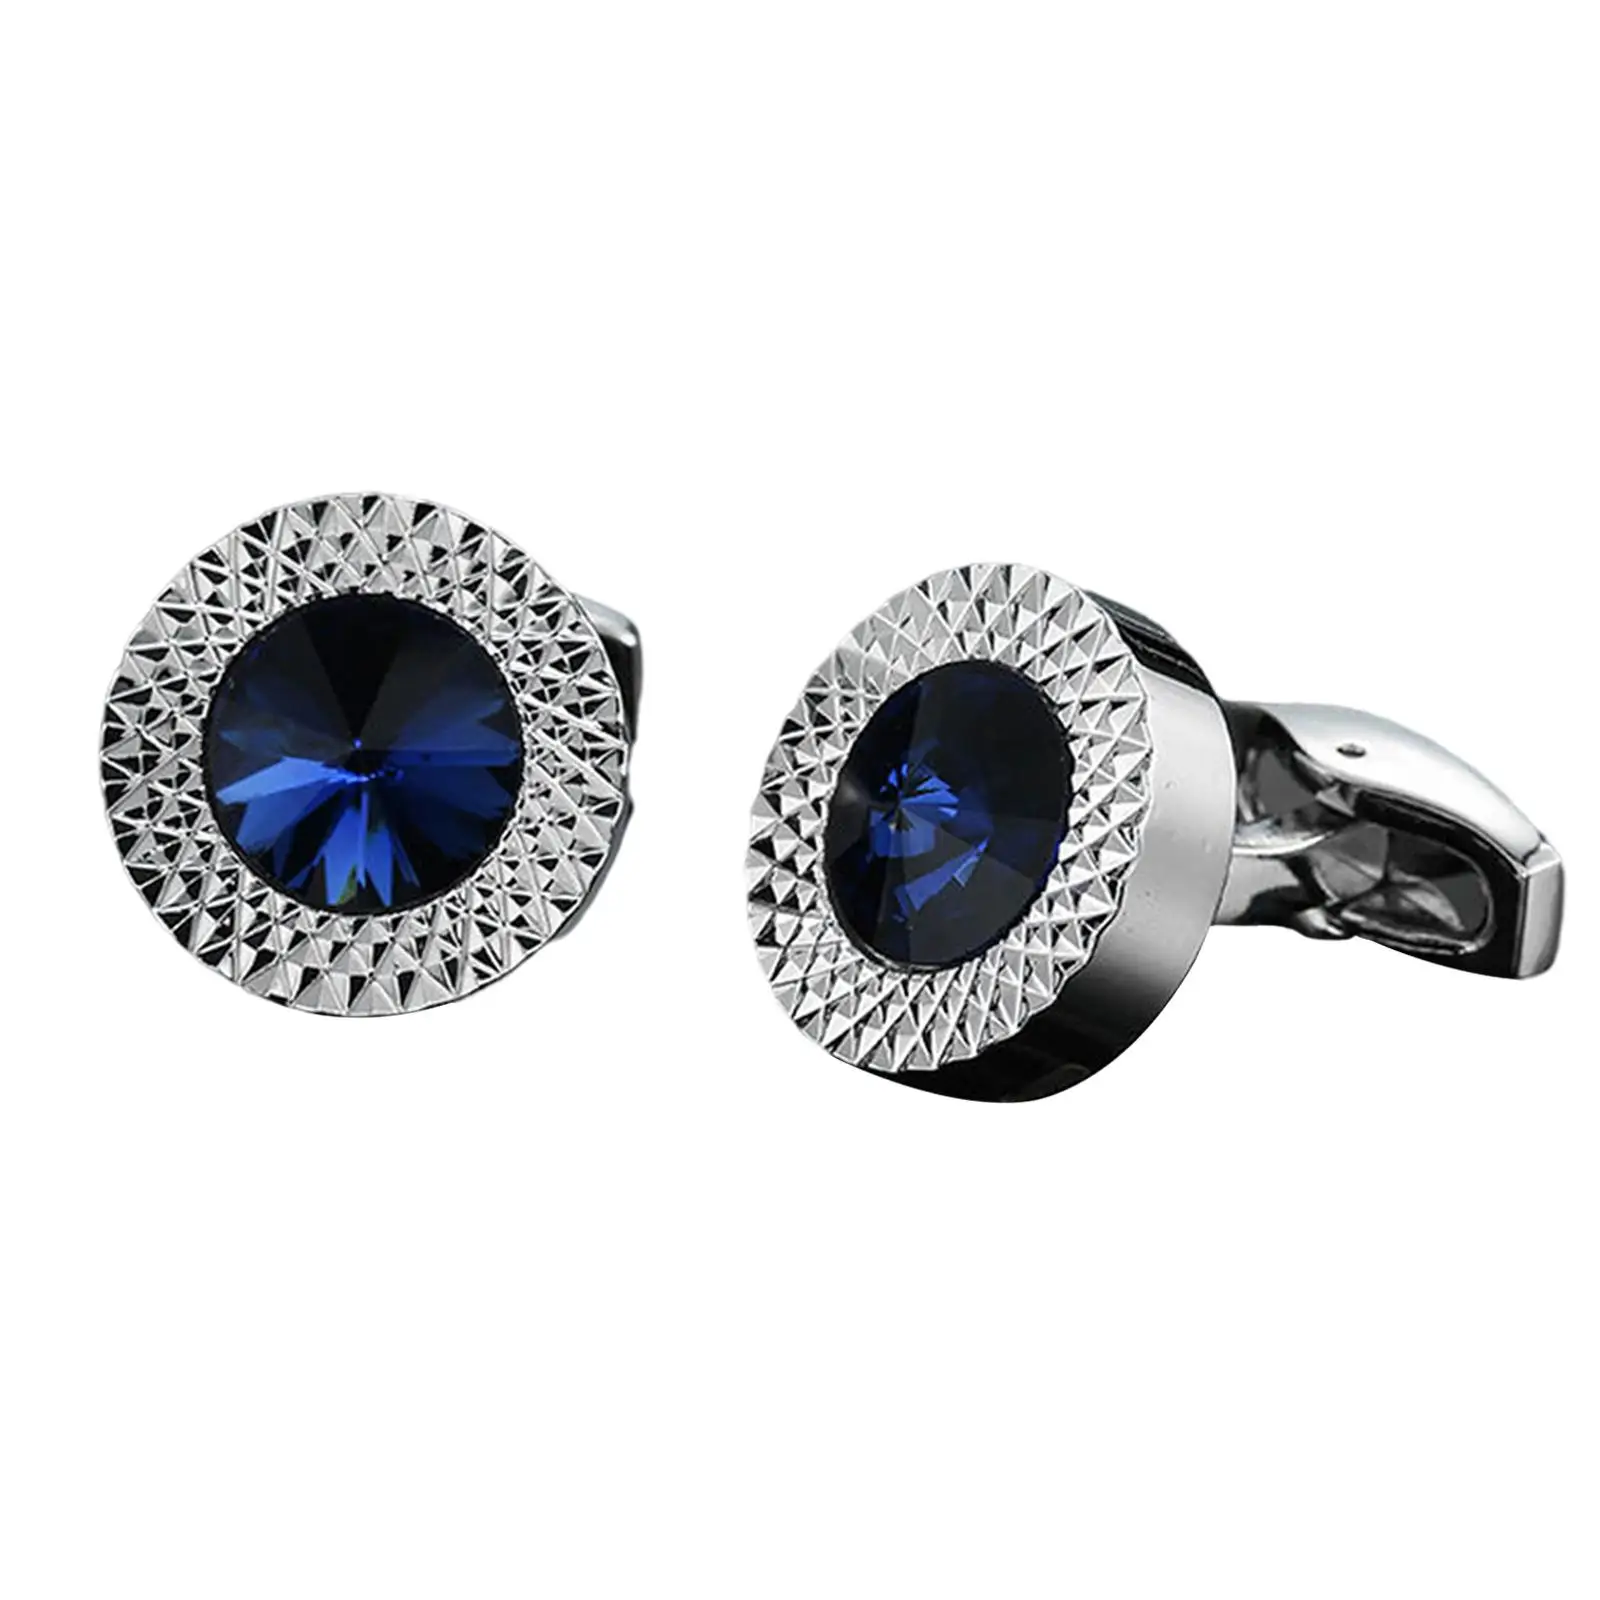 2x Elegant Cuff Links Simply Shirt Fashion Decor Buttons Jewelry for Party Gift Wedding